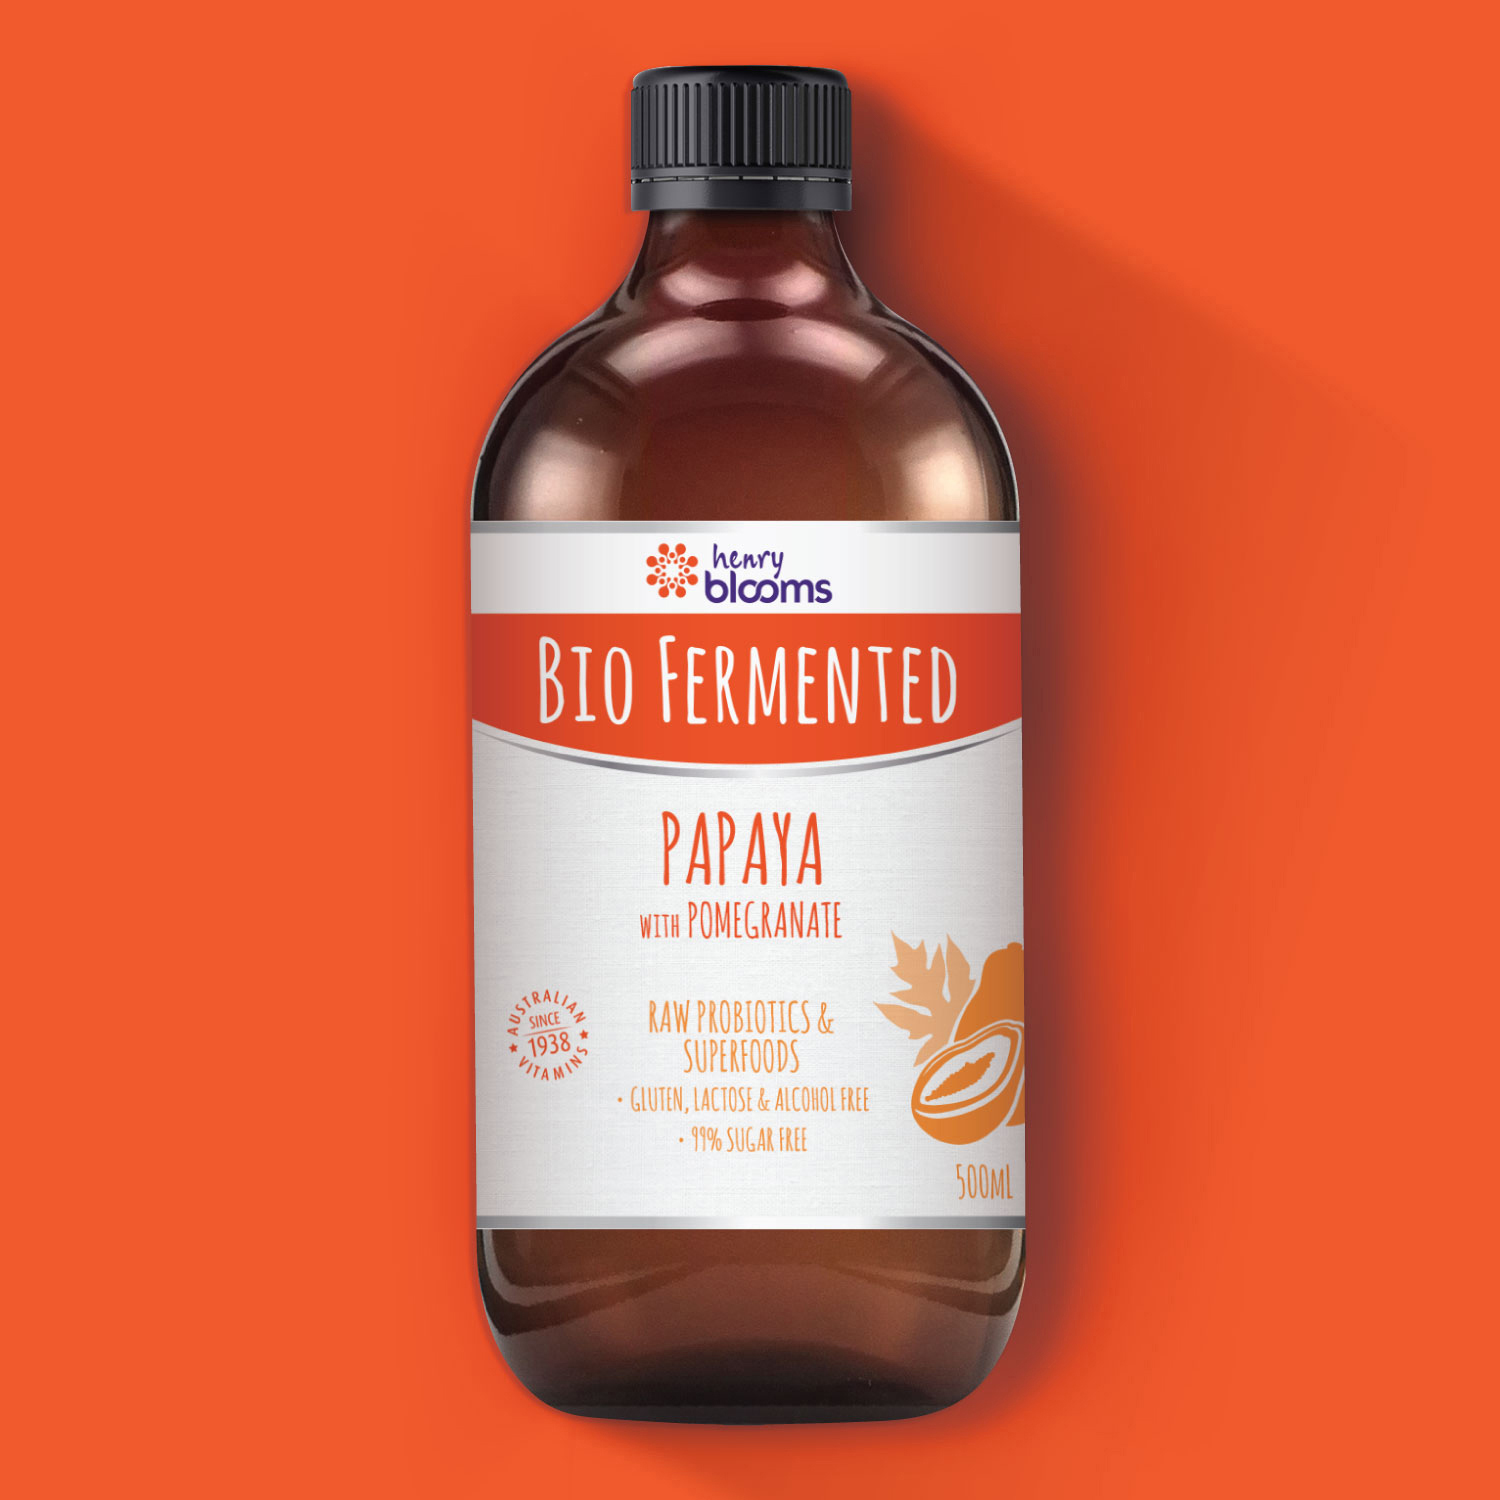 Energi Packaging Design Agency Specialists Henry Blooms Bio Fermented Gluten-Free Lactose-Free Alcohol-Free Sugar-Free Vitamin Mineral Supplement Raw Probiotics Superfood Superfoods Turmeric Papaya Pomegranate Product Photography Label